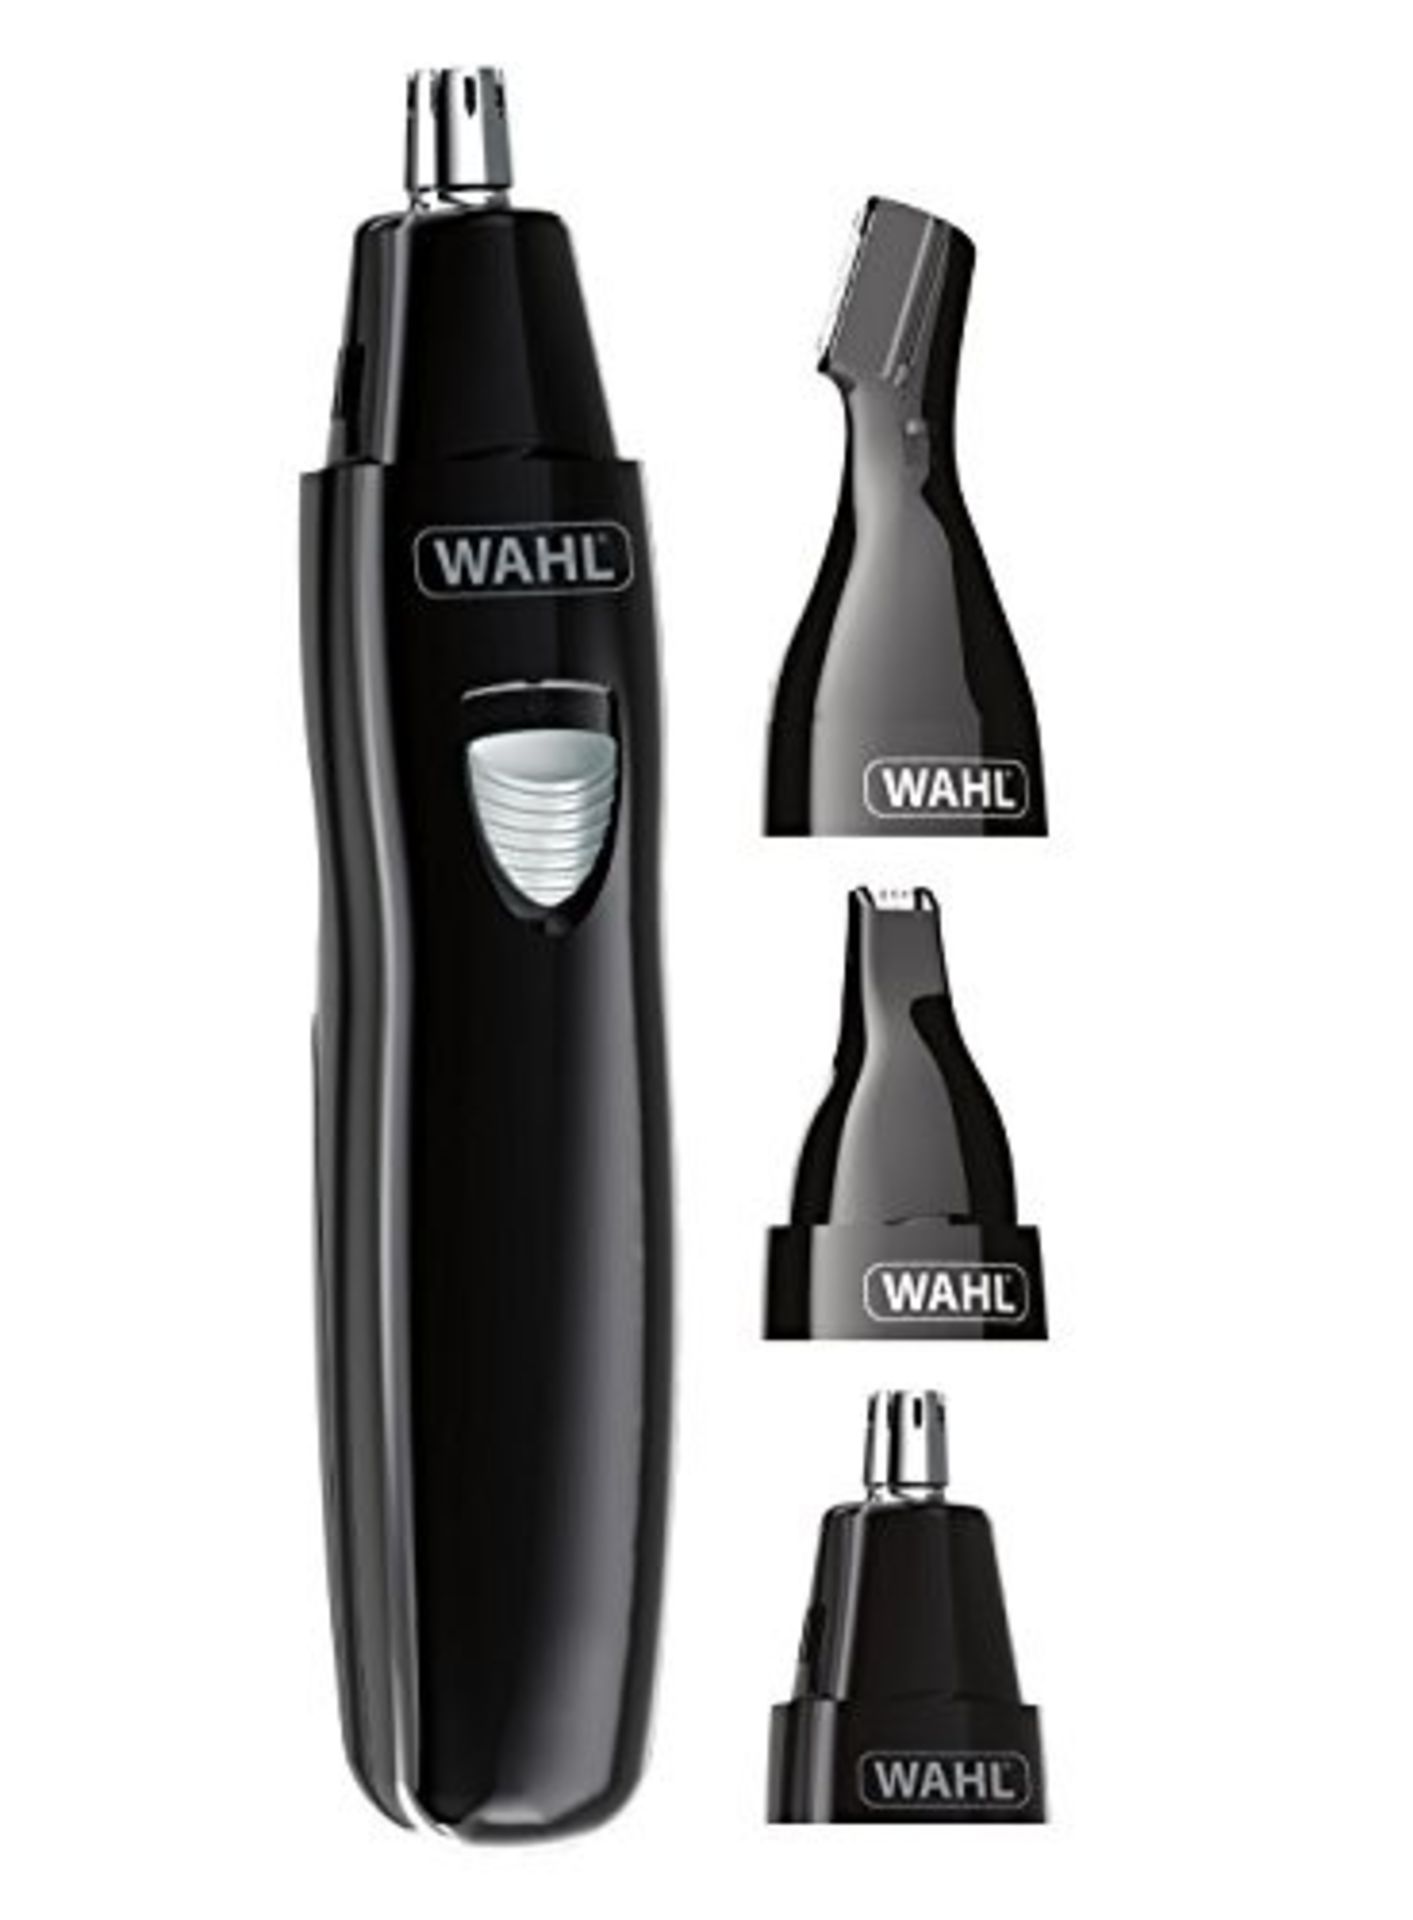 COMBINED RRP £118.00 LOT TO CONTAIN 8 ASSORTED Personal Care Appliances: GroomEase, Wahl, Wahl, - Image 7 of 9